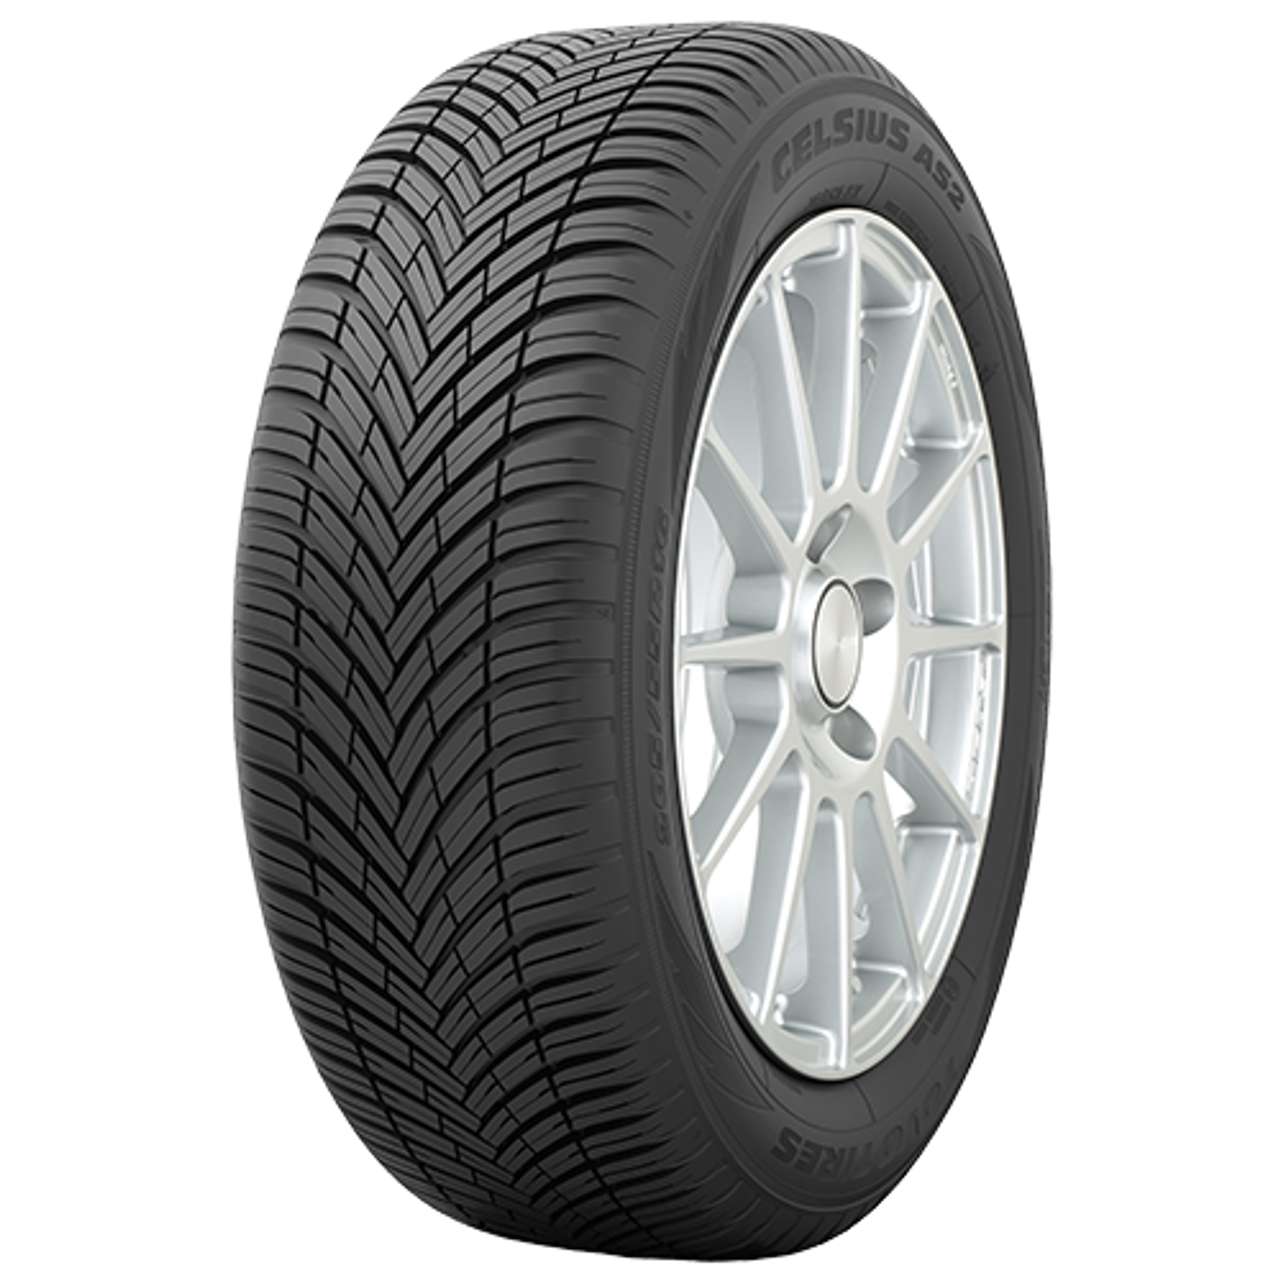 TOYO CELSIUS AS2 235/60R18 107W BSW